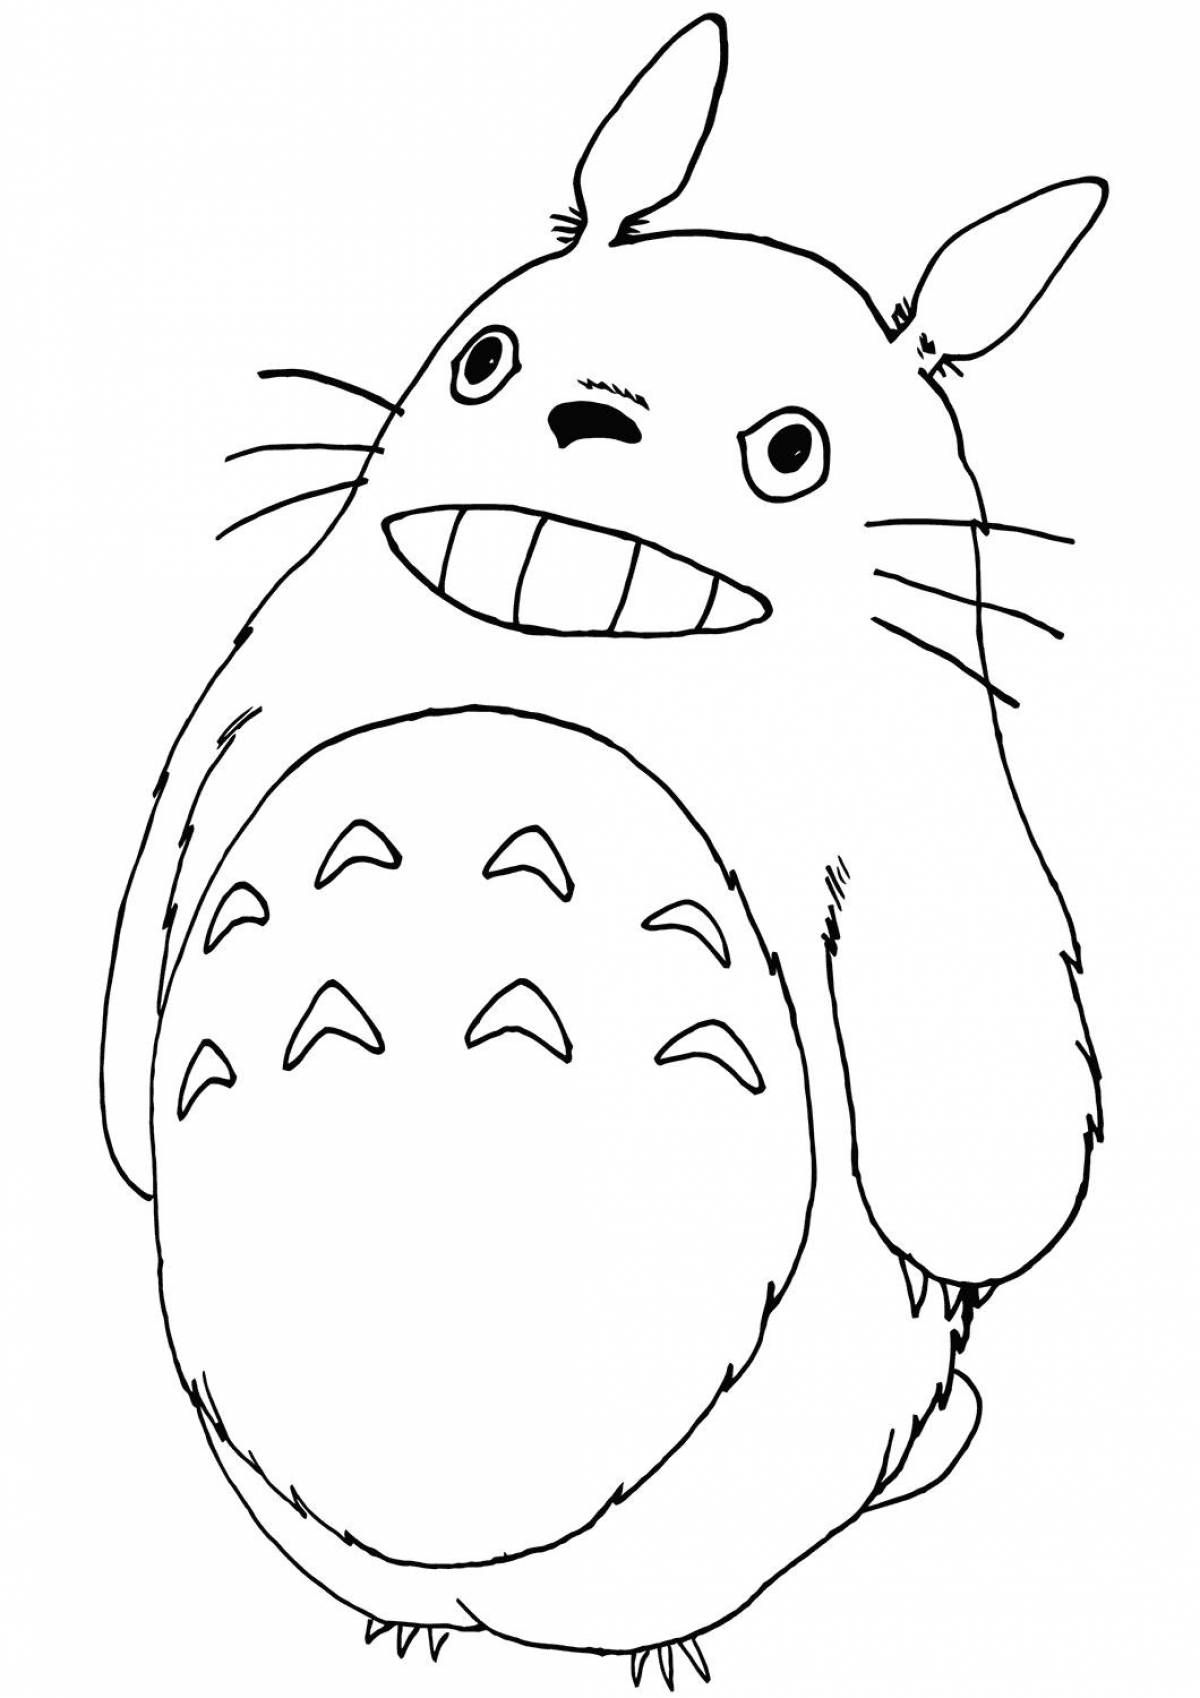 Gorgeous totoro coloring book